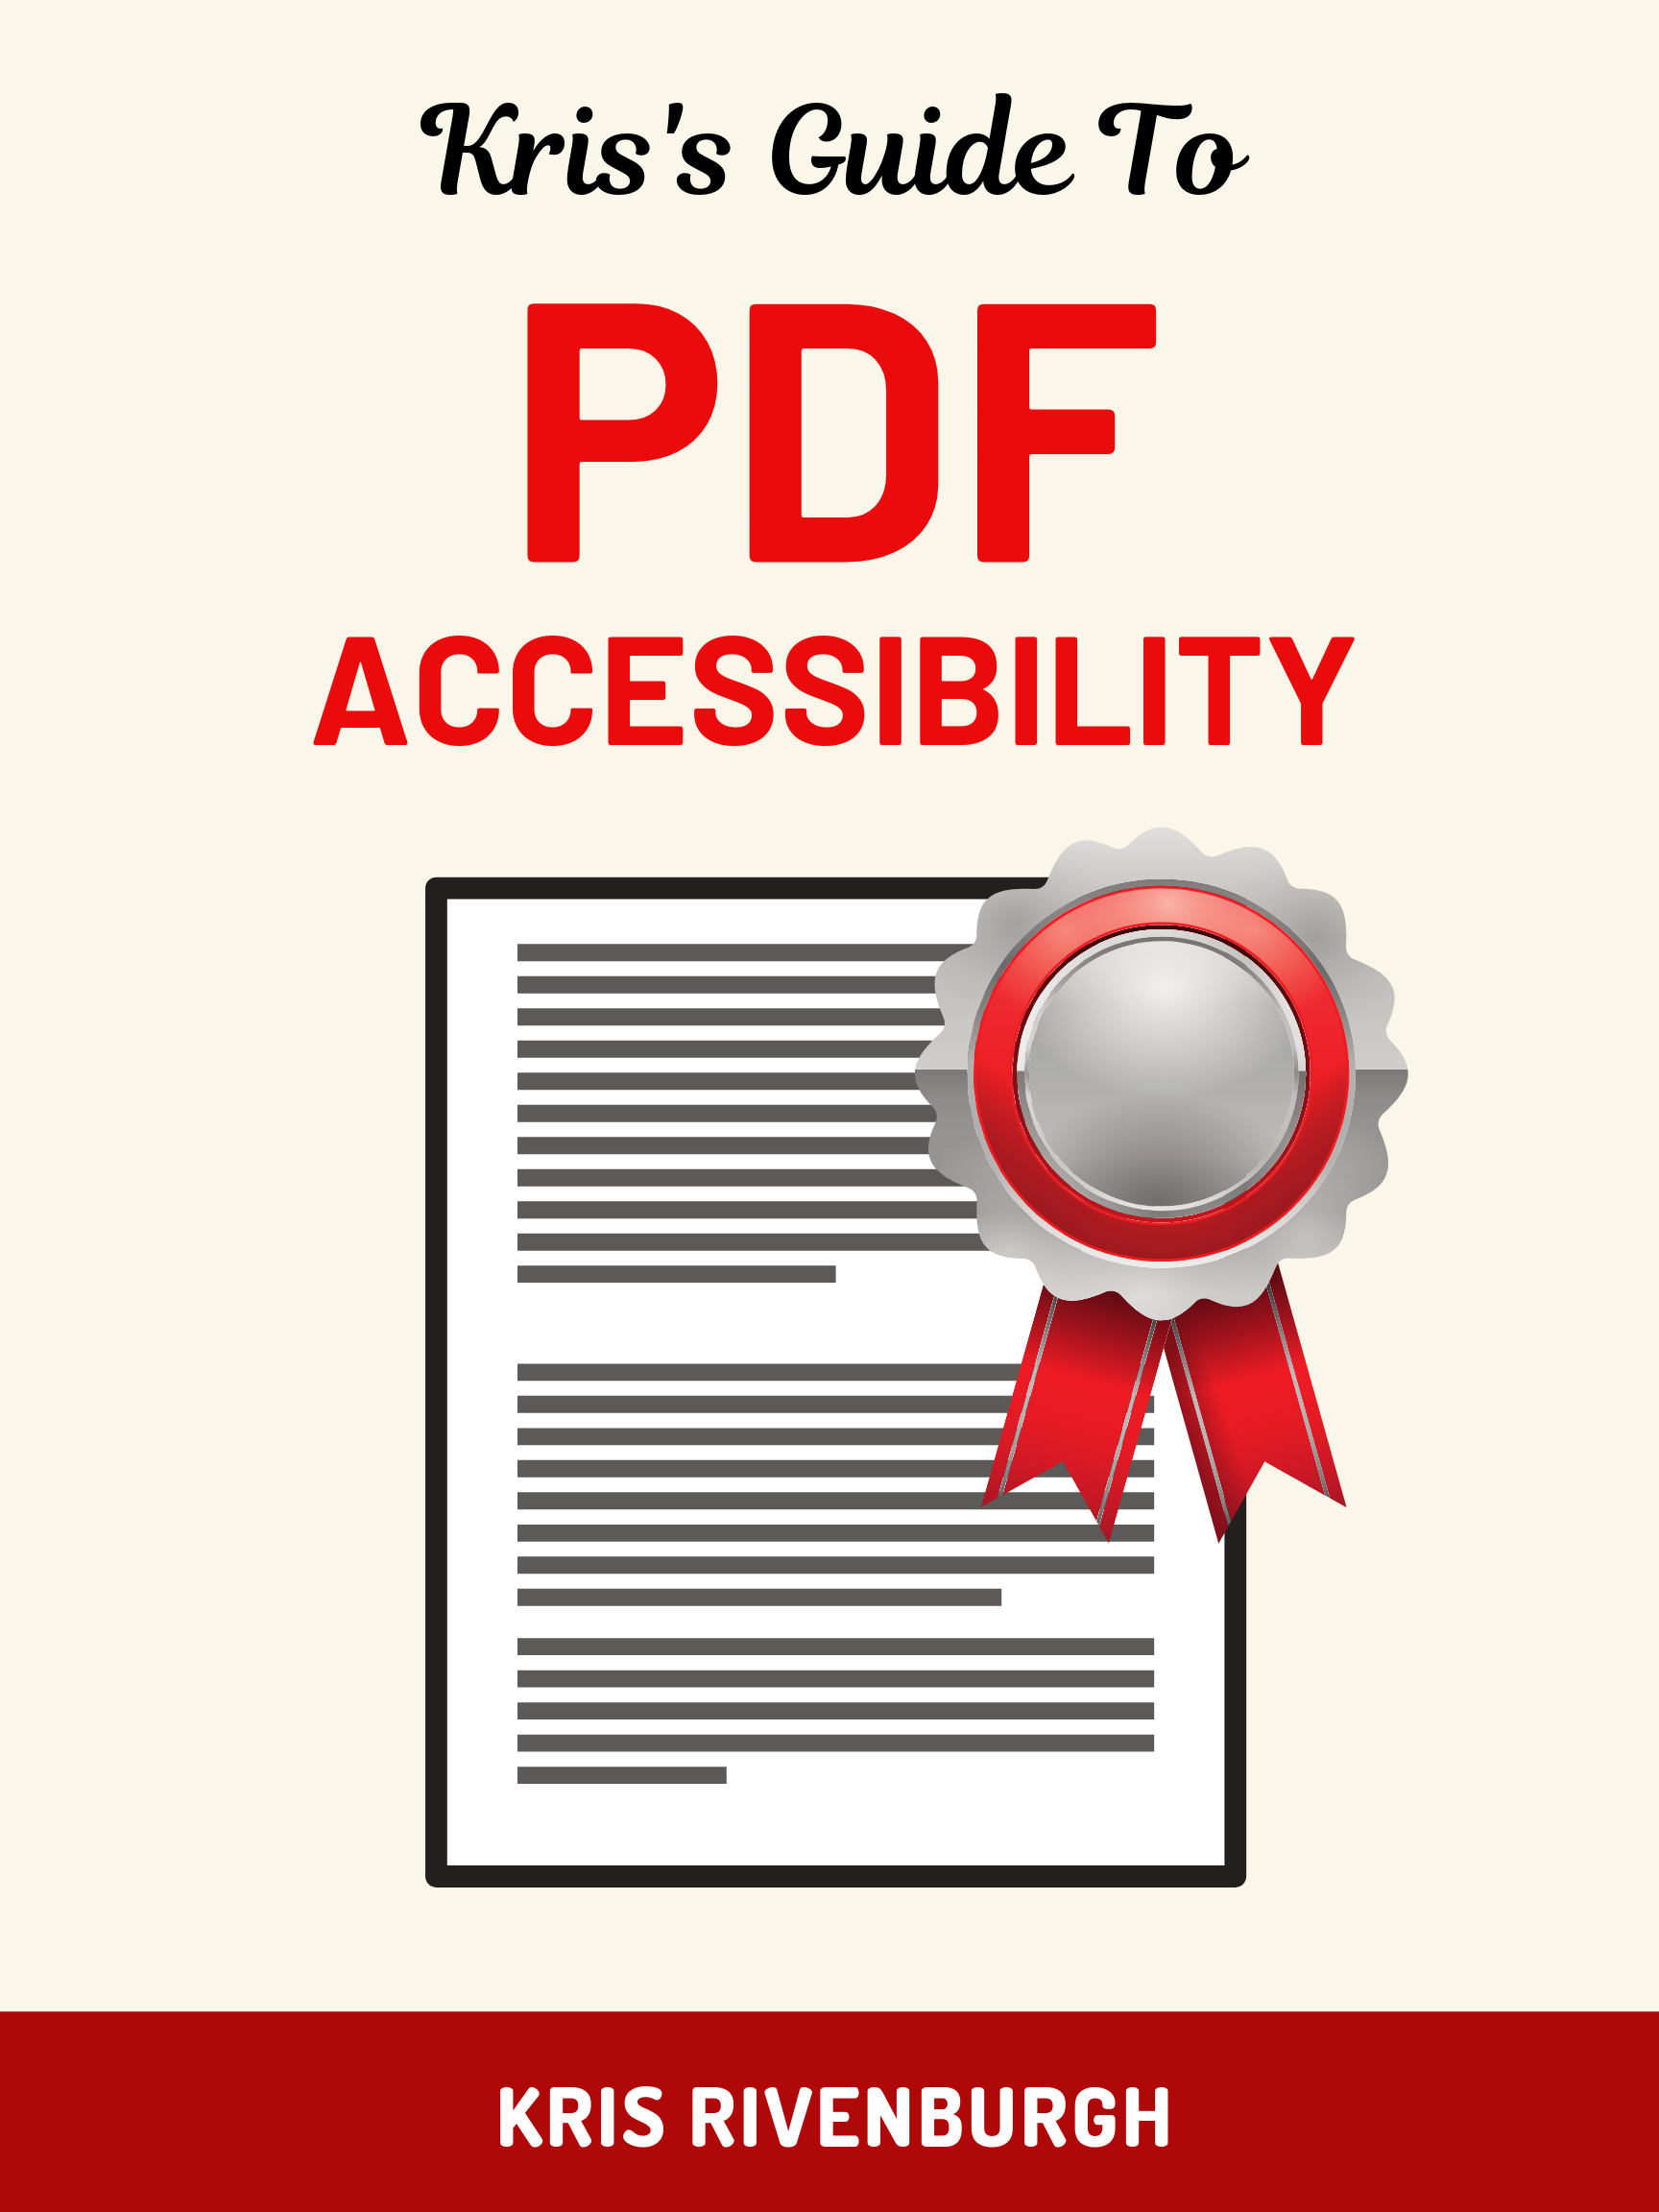 The Pdf Accessibility Guide How To Make Your Portable Documents Accessible By Kris Rivenburgh Medium